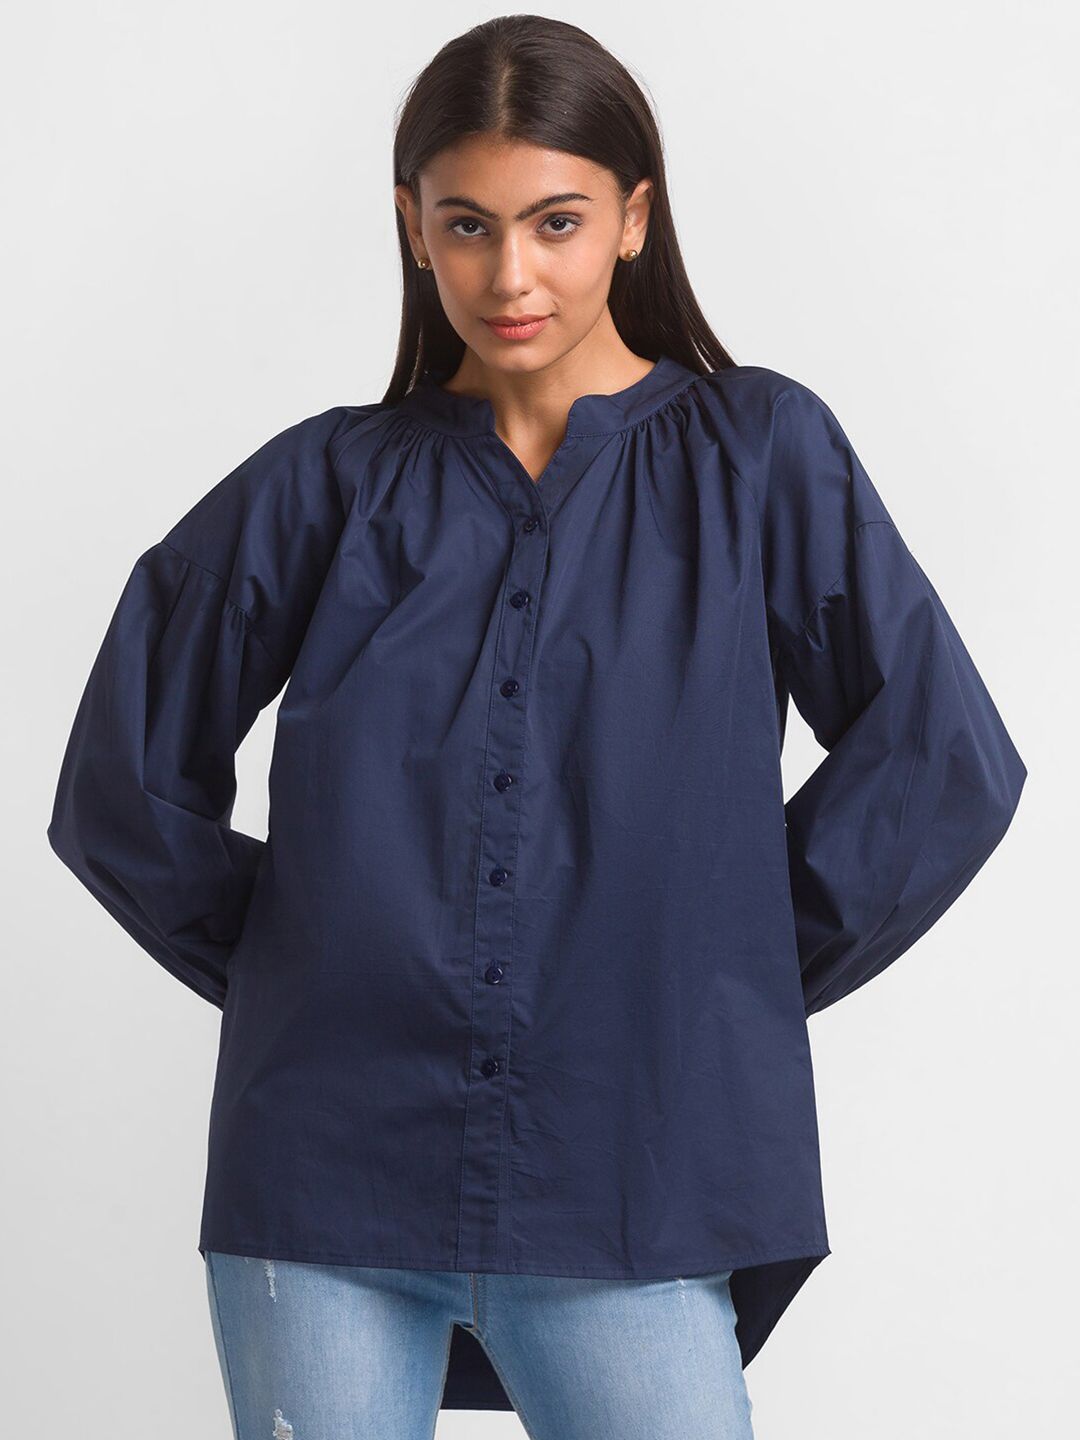 Globus Women Blue Solid Pure Cotton Mandarin Collar Shirt Style Top Price in India